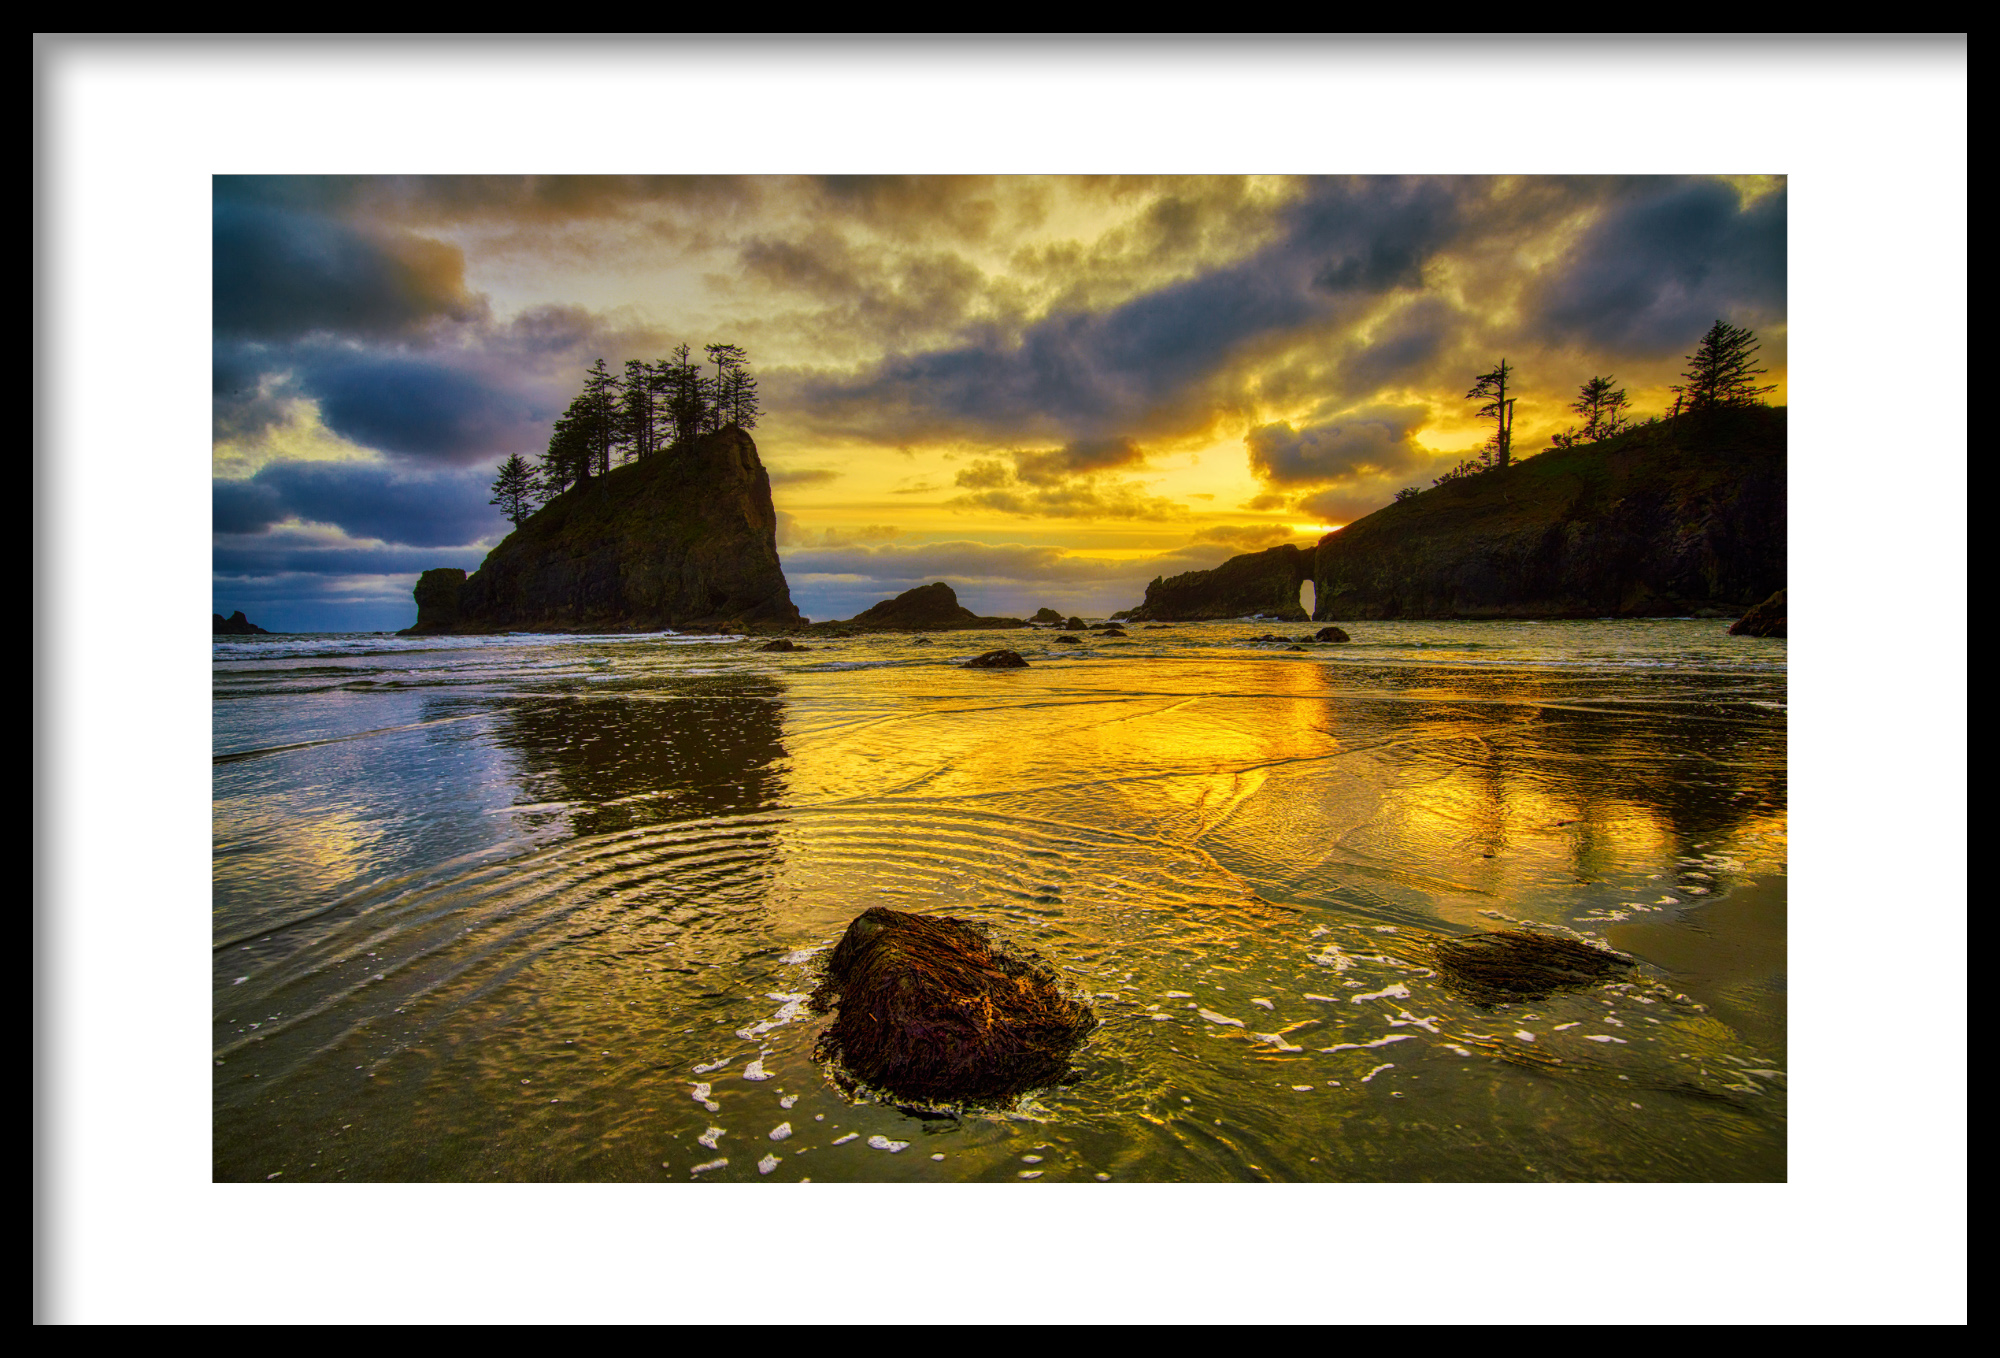 Sunset in Olympic National Park, Second Street Beach